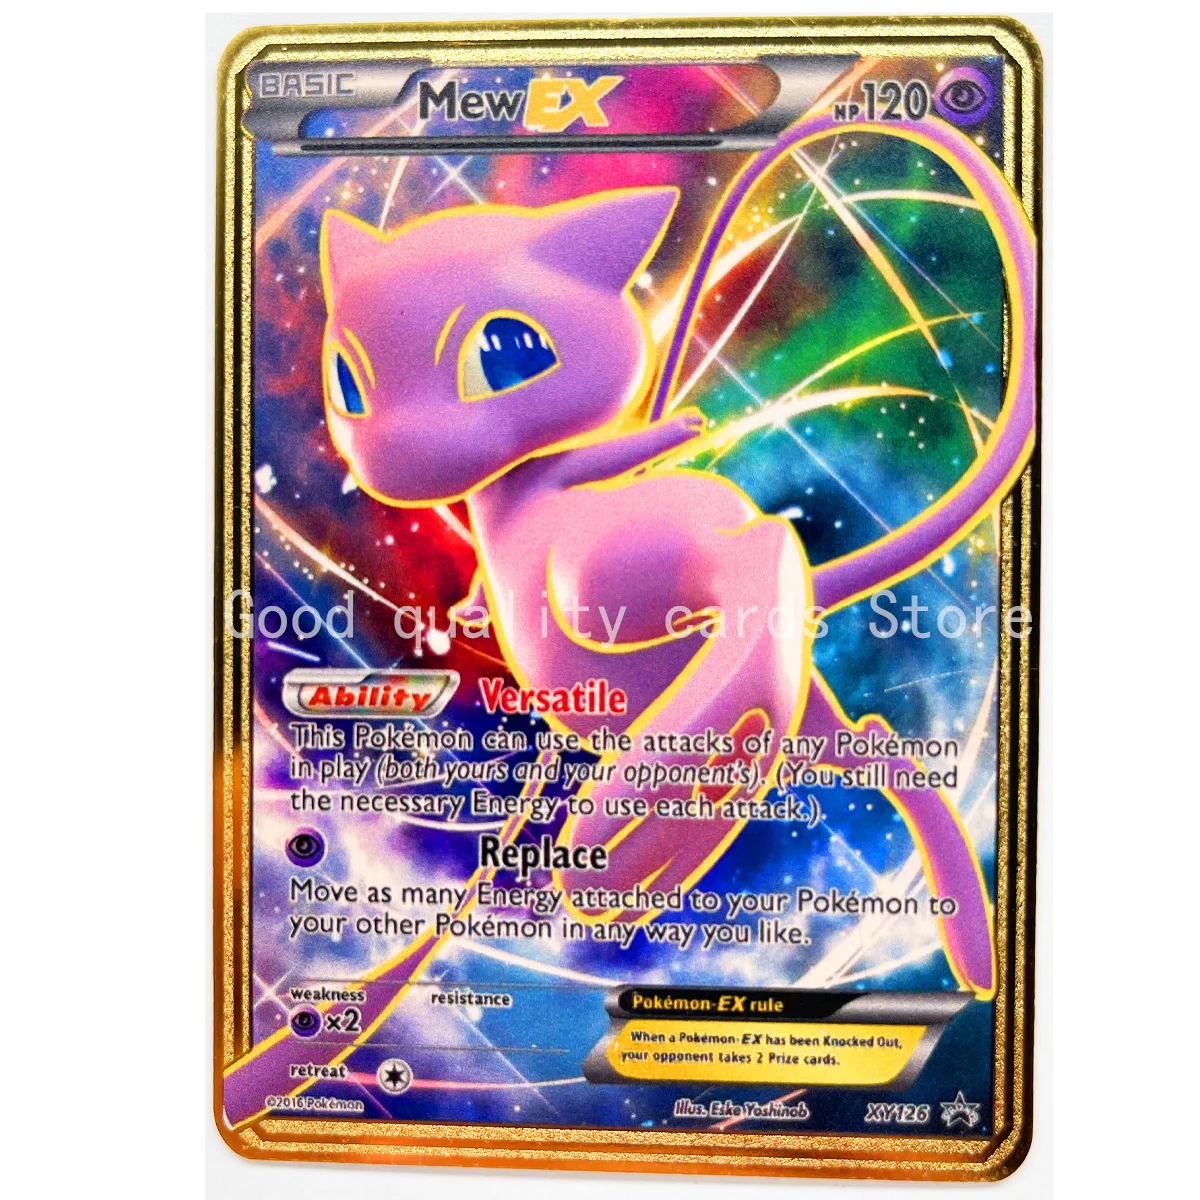 27 Styles Pokemon Mew-two Stainless Steel Metal Toys Hobbies Hobby  Collectibles Game Collection Anime Cards - Game Collection Cards -  AliExpress